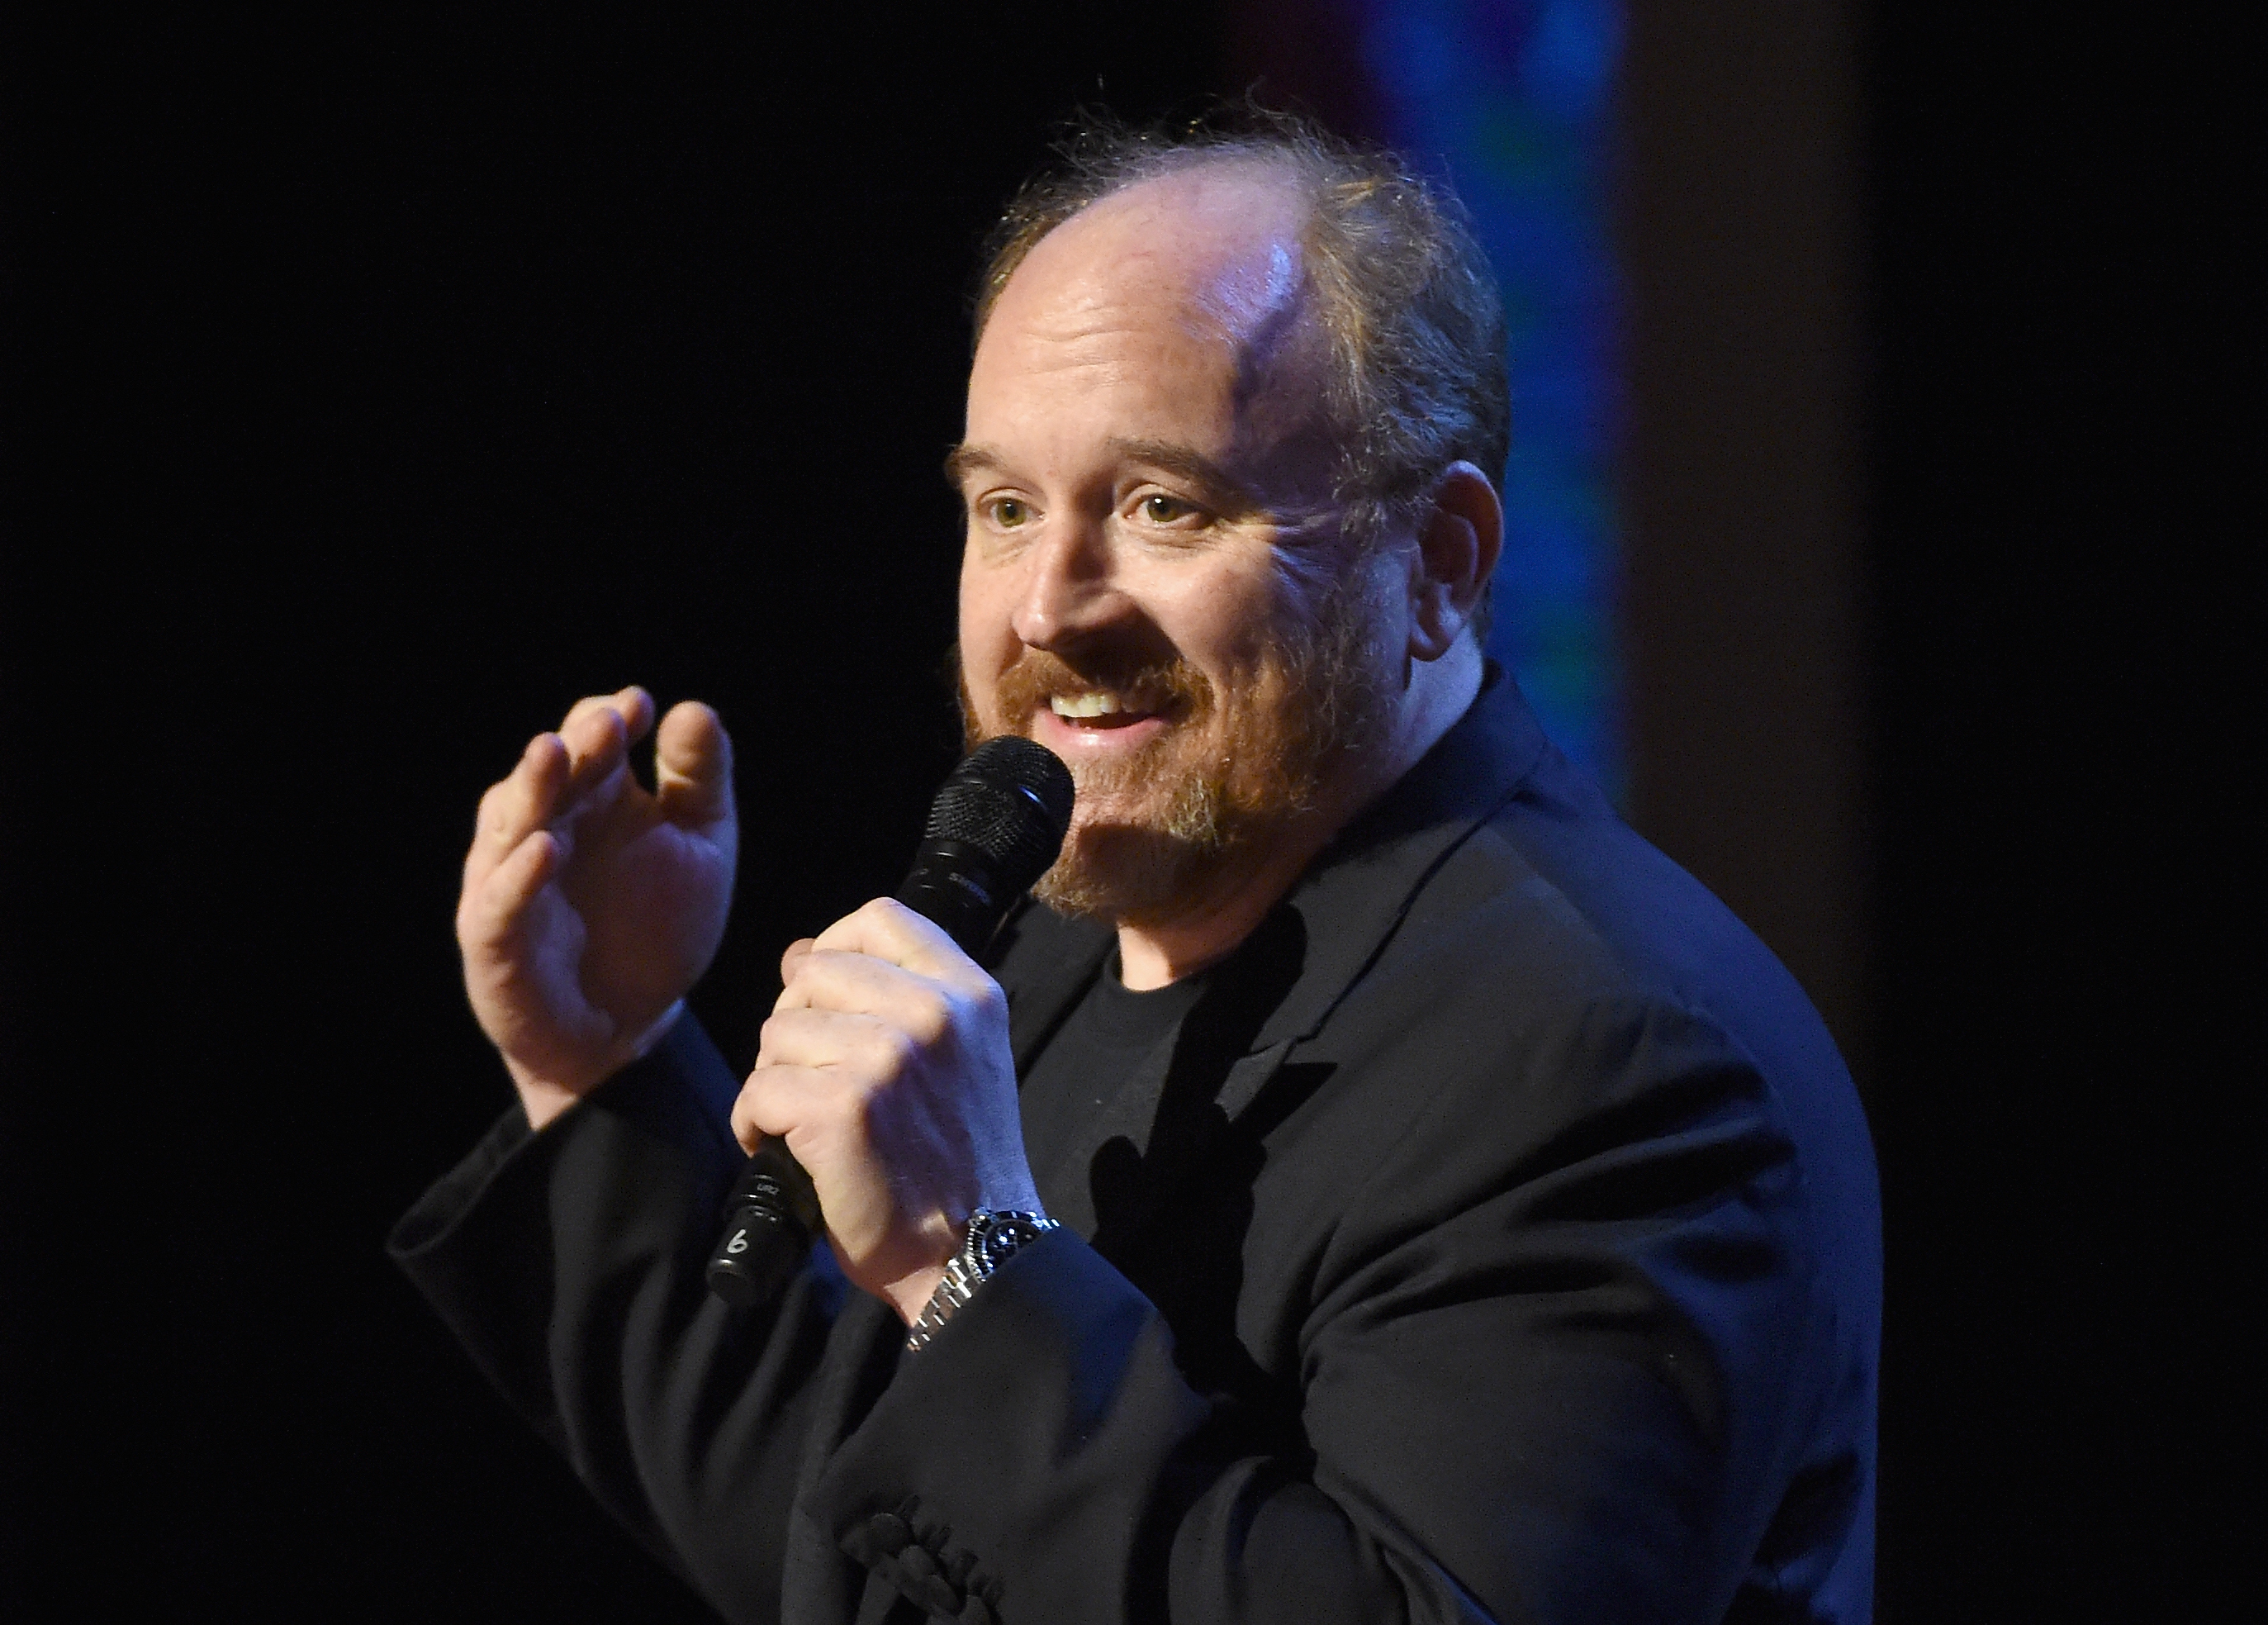 Louis C.K. performs onstage at Comedy Central Night Of Too Many Stars at Beacon Theatre on February 28, 2015 in New York City. (Photo by Mike Coppola/Getty Images for Comedy Central)